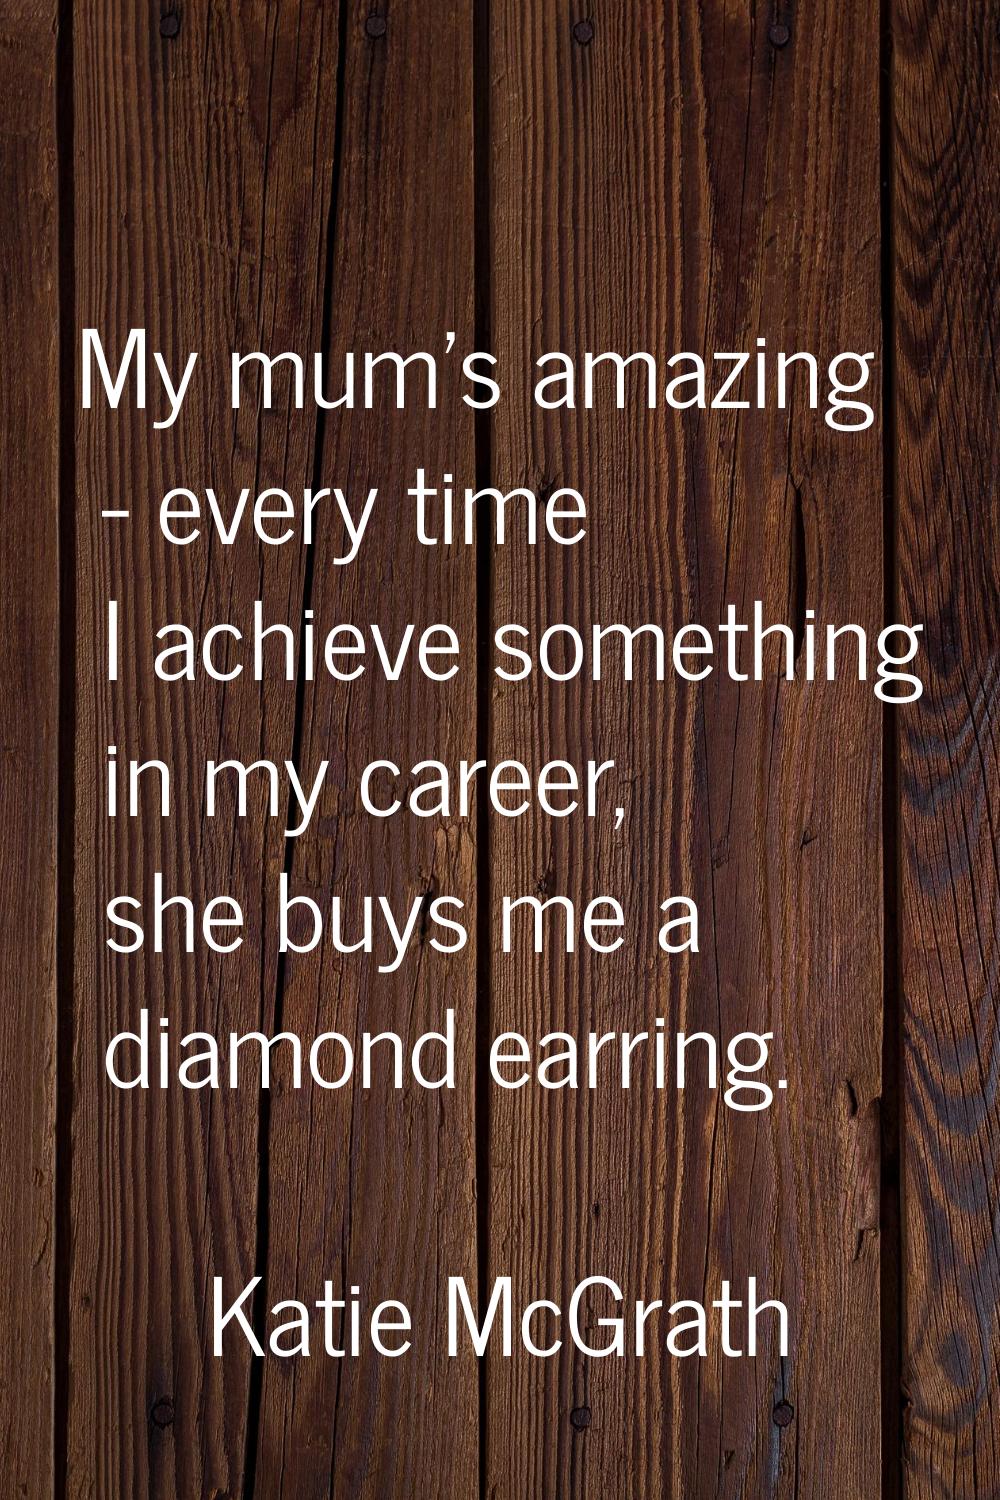 My mum's amazing - every time I achieve something in my career, she buys me a diamond earring.